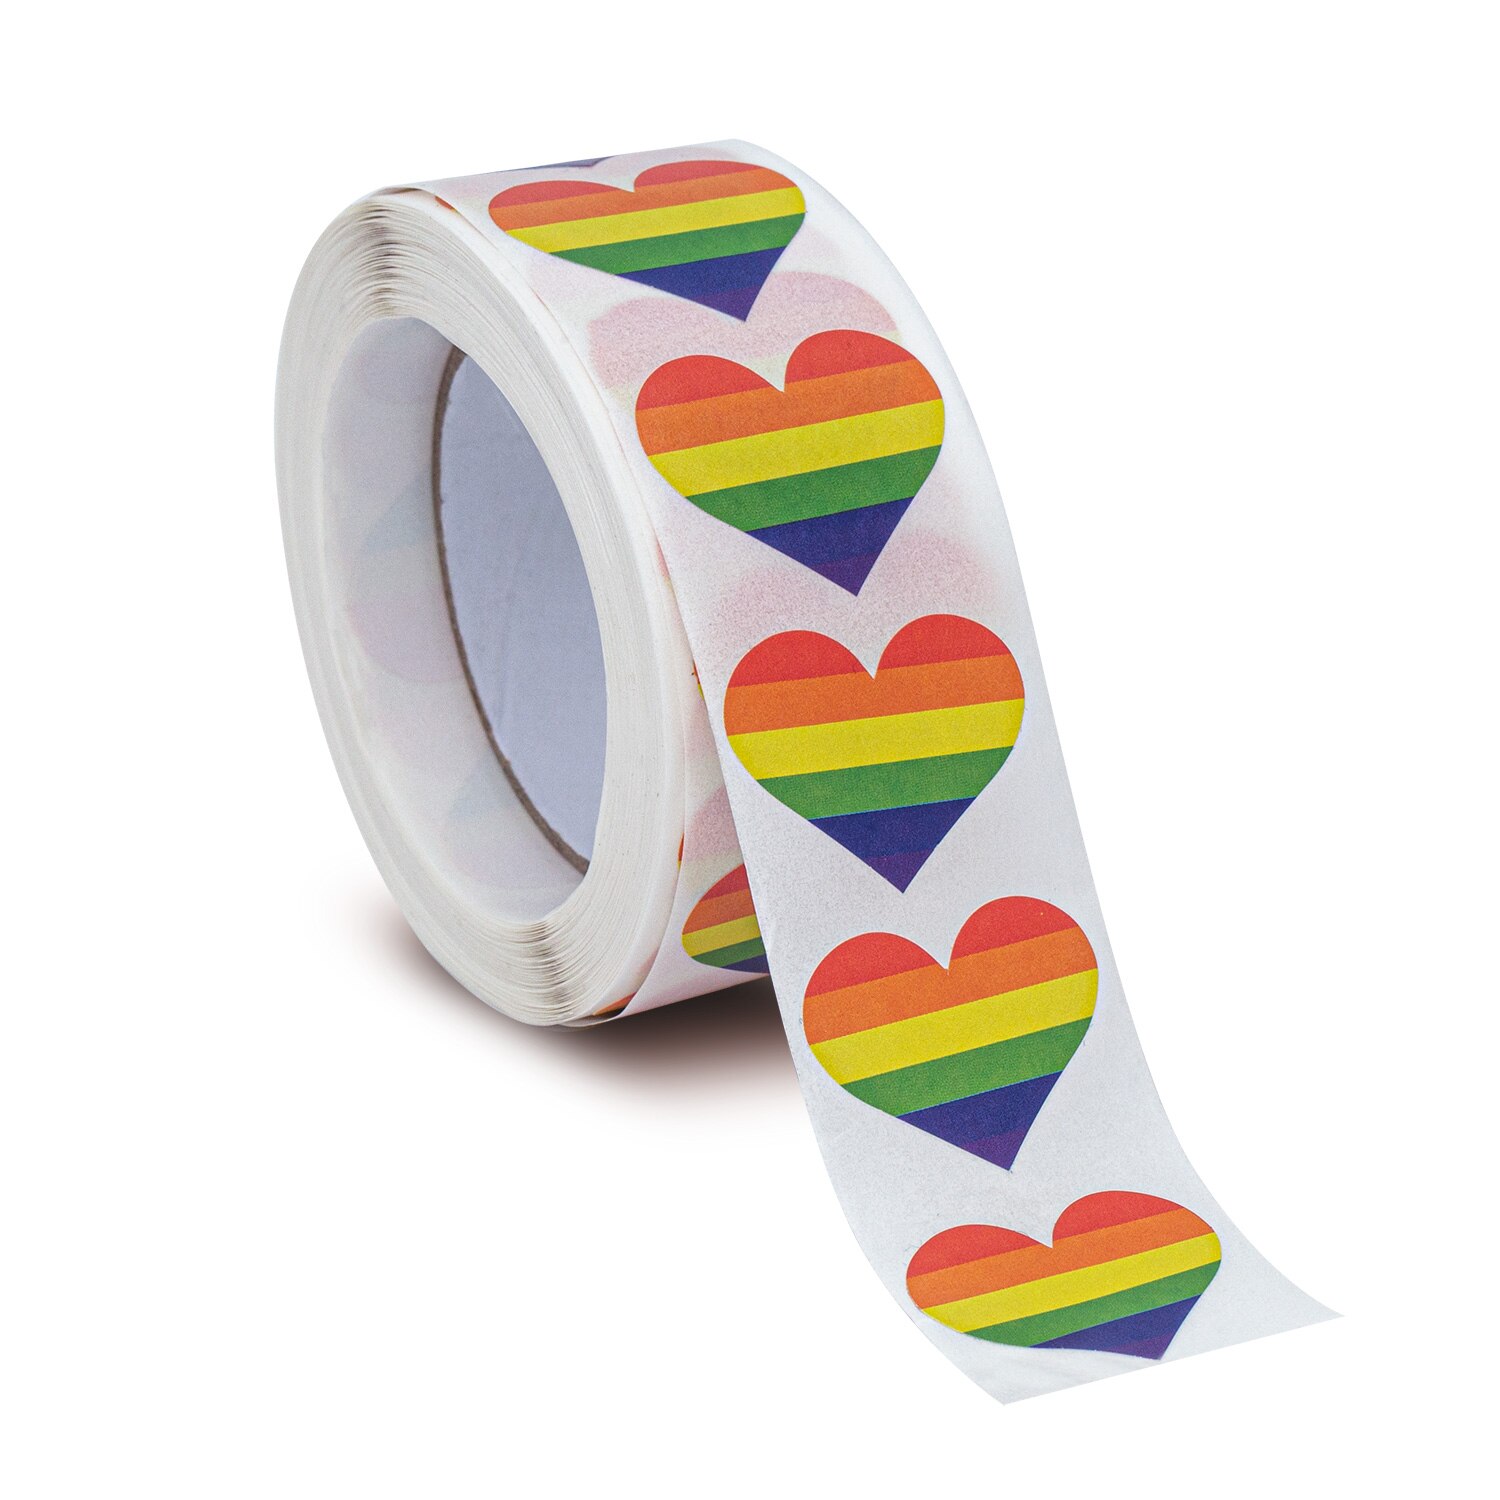 PrideOutlet > Stickers > Roll of Rainbow Pride Heart Stickers (500 Stickers)